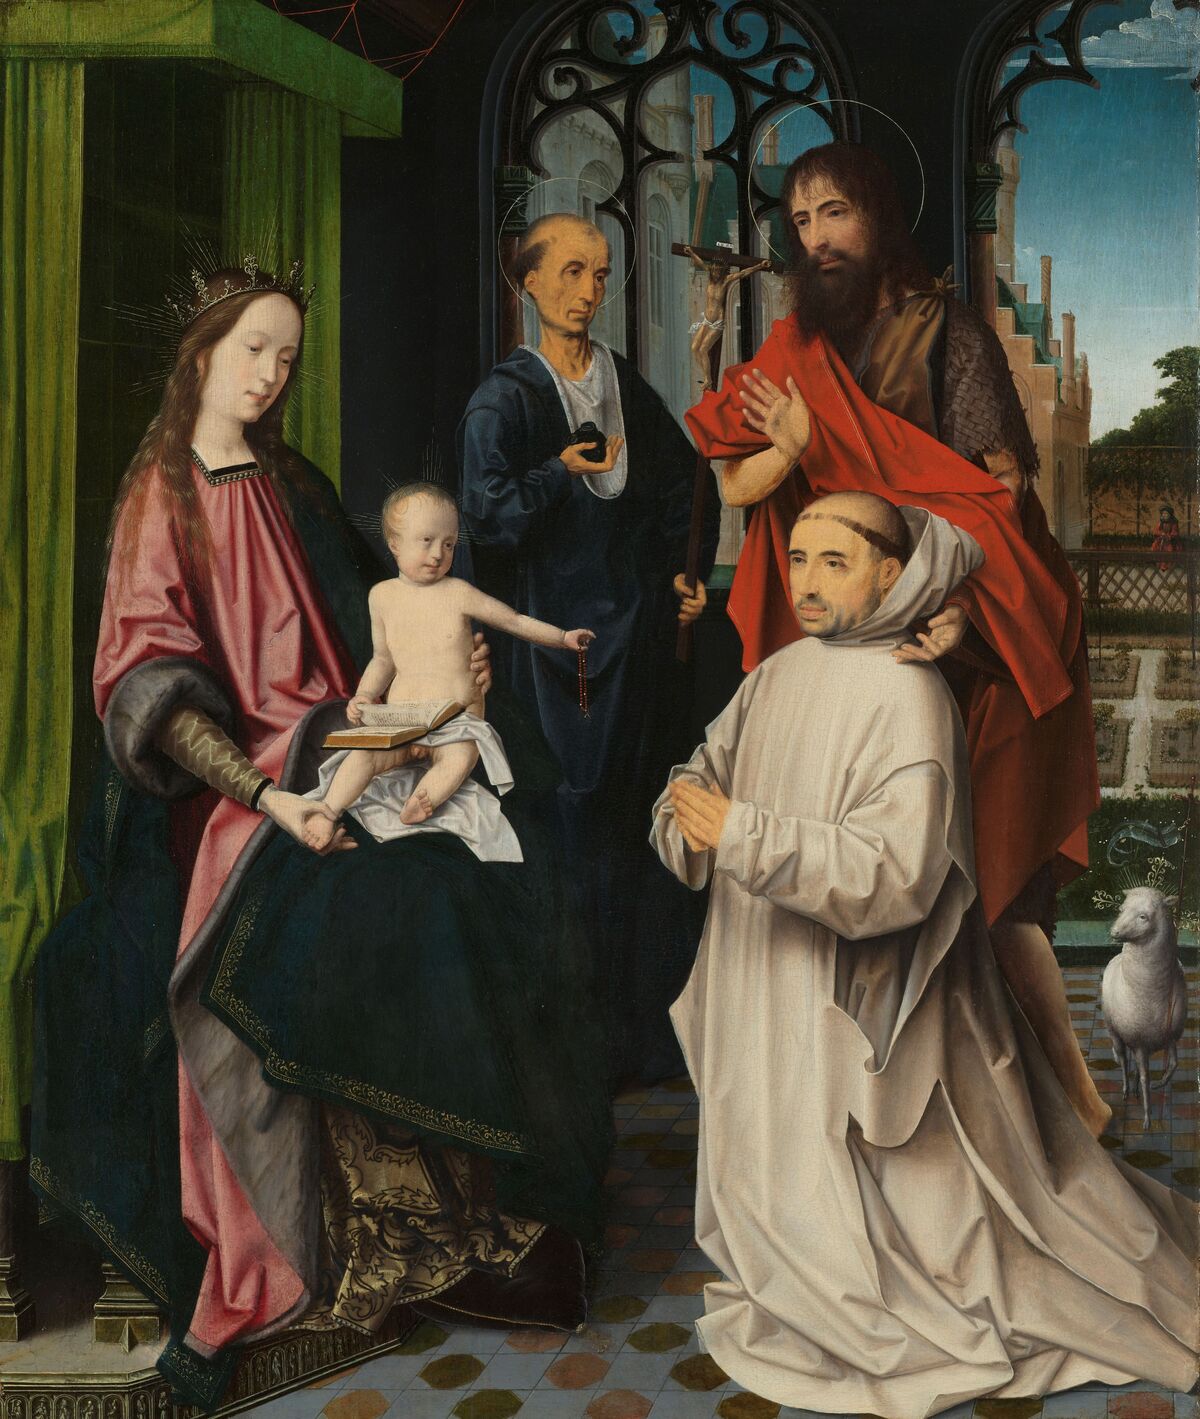 Attributed to Jan Provoost, Virgin and Child Enthroned, with Saints Jerome and John the Baptist and a Carthusian Monk, ca. 1510. Courtesy of the Rijksmuseum.